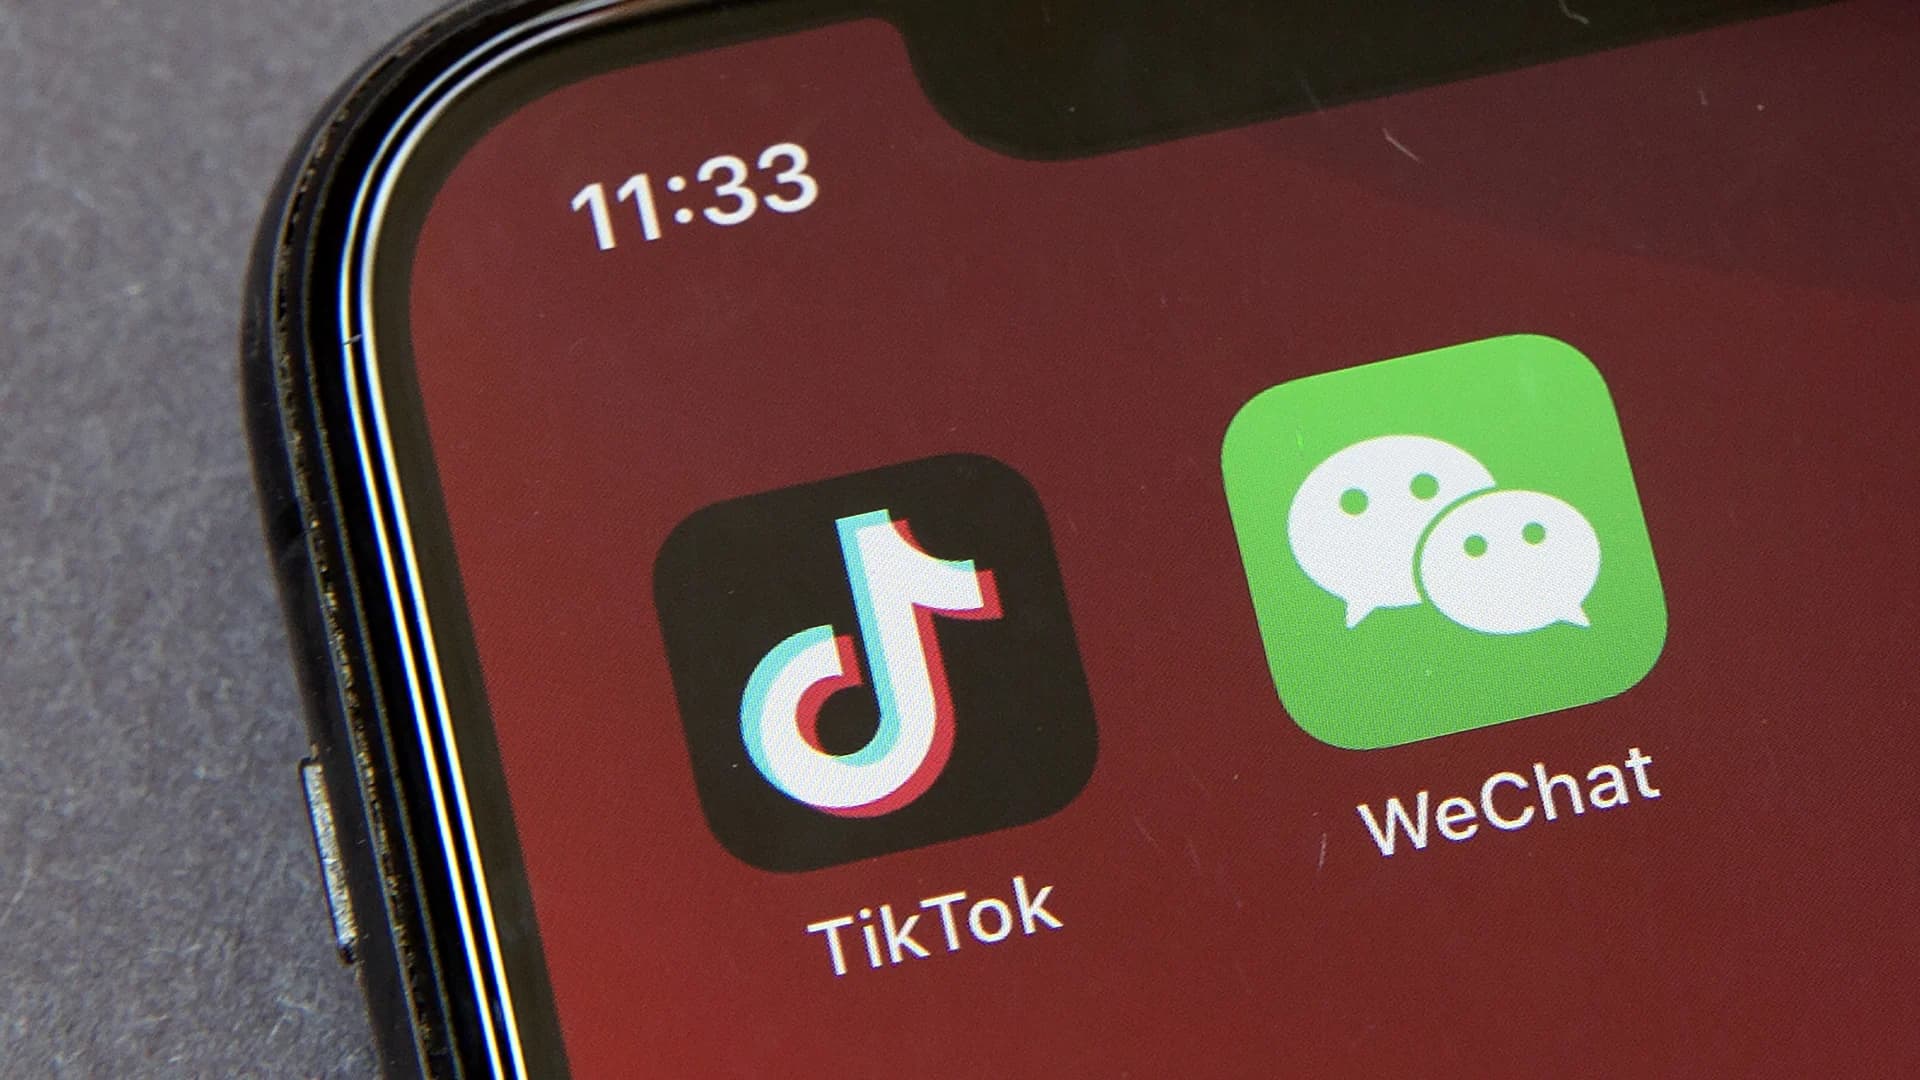 US banning downloads of TikTok and WeChat starting Sunday over national security concerns